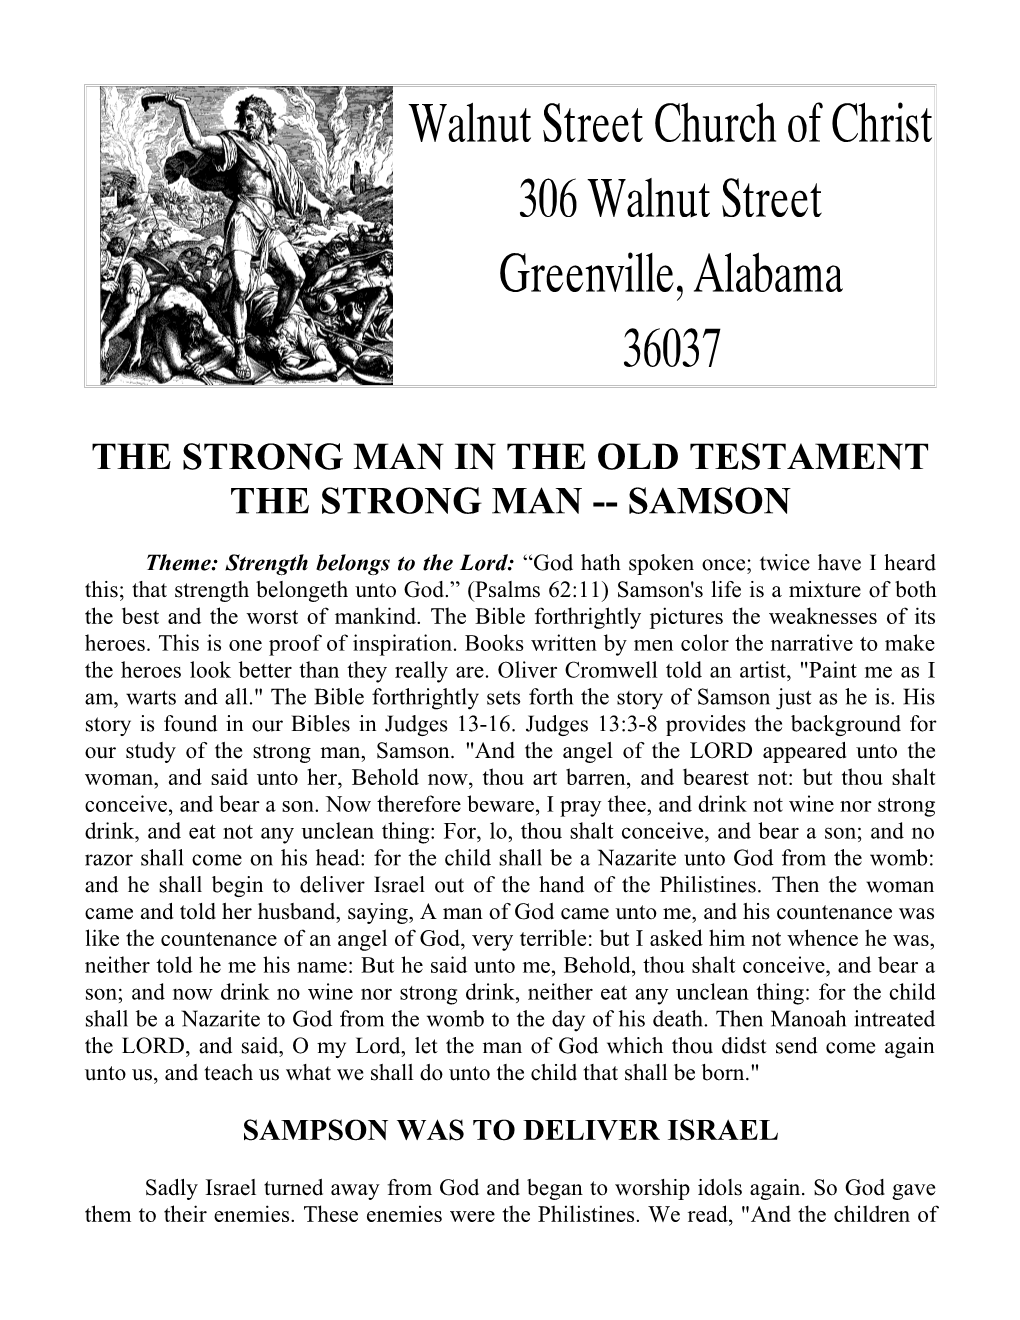 The Strong Man in the Oldtestament